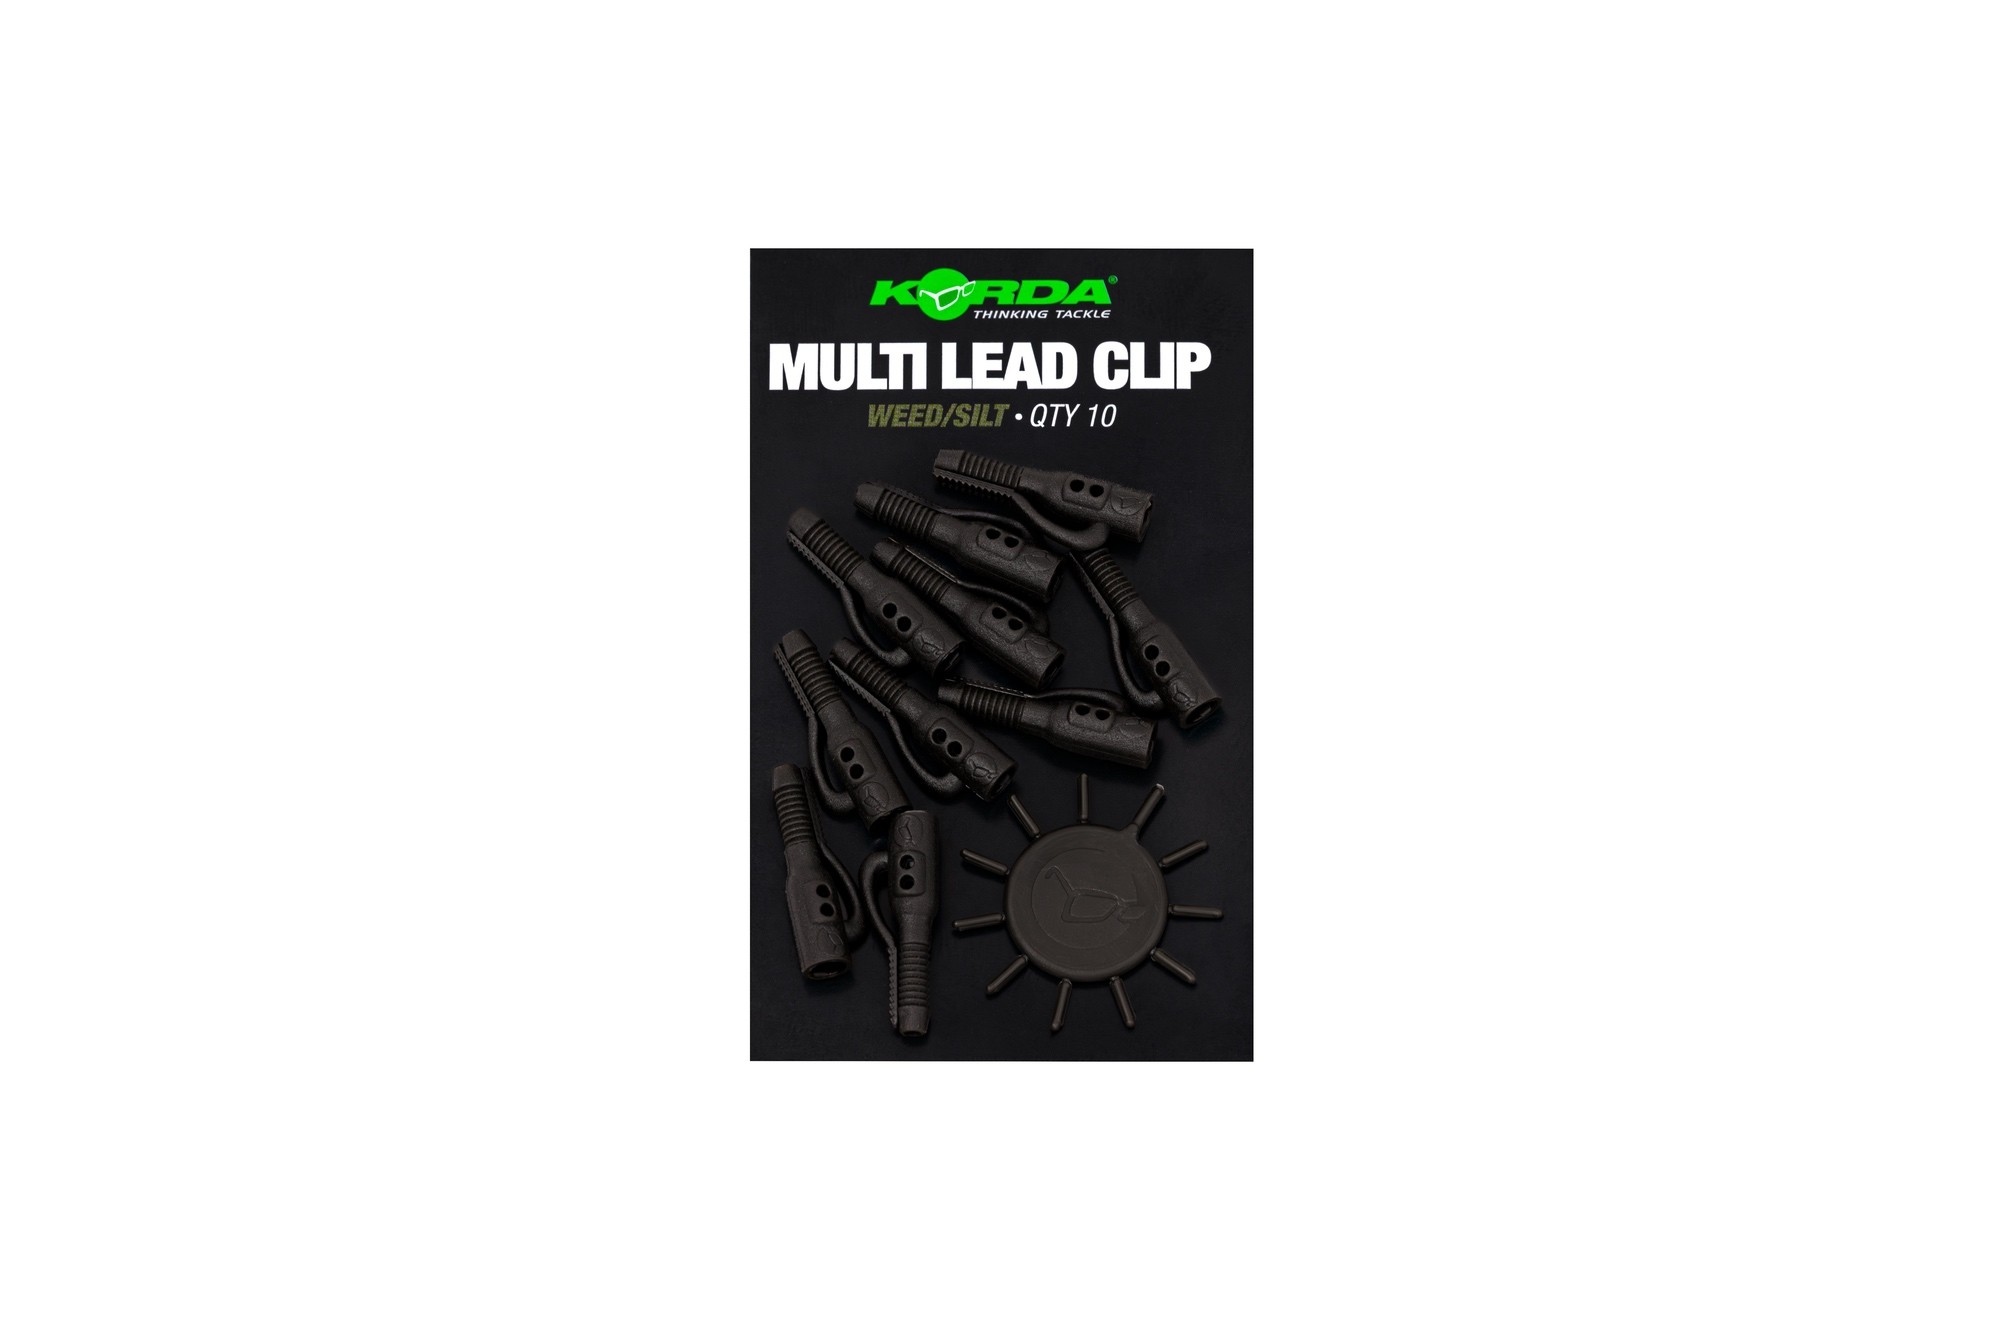 Korda Lead Clip Pin (10 pieces) - Weed/Silt